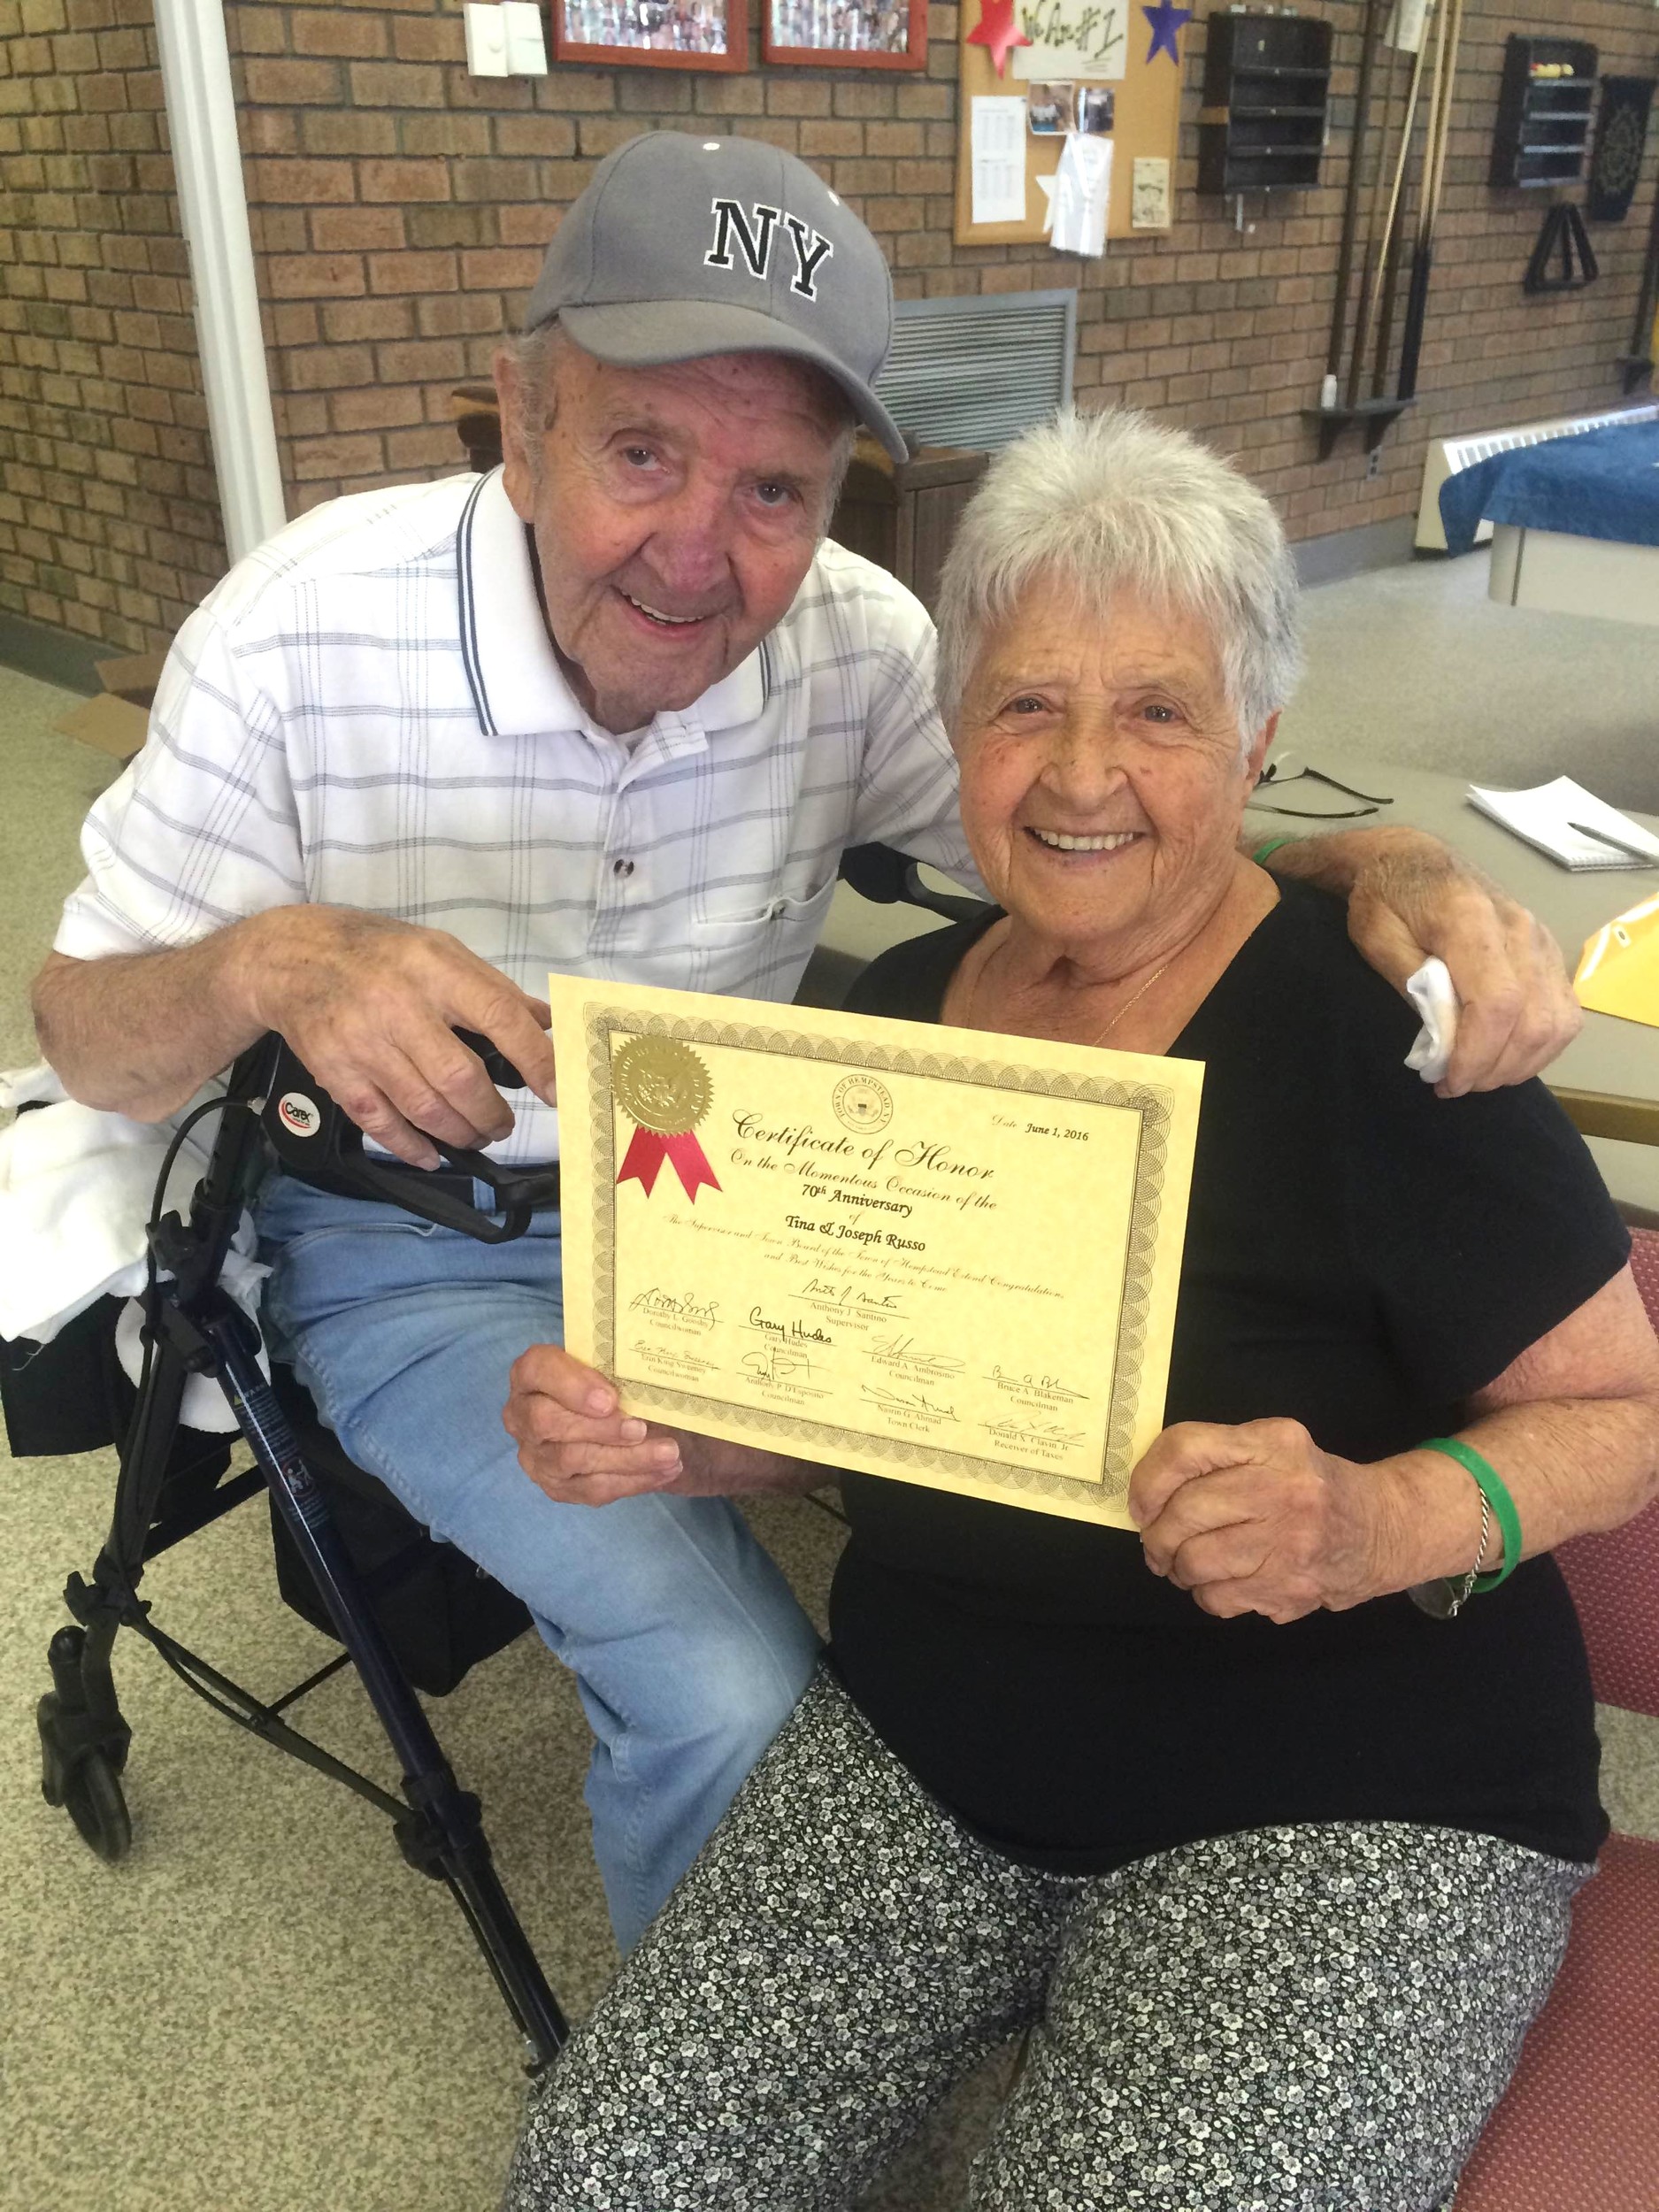 Joseph and Tina Russo celebrated their 70th wedding anniversary on June 1 at the Wantagh-Seaford Senior Center and were presented with a certificate from the Town of Hempstead.